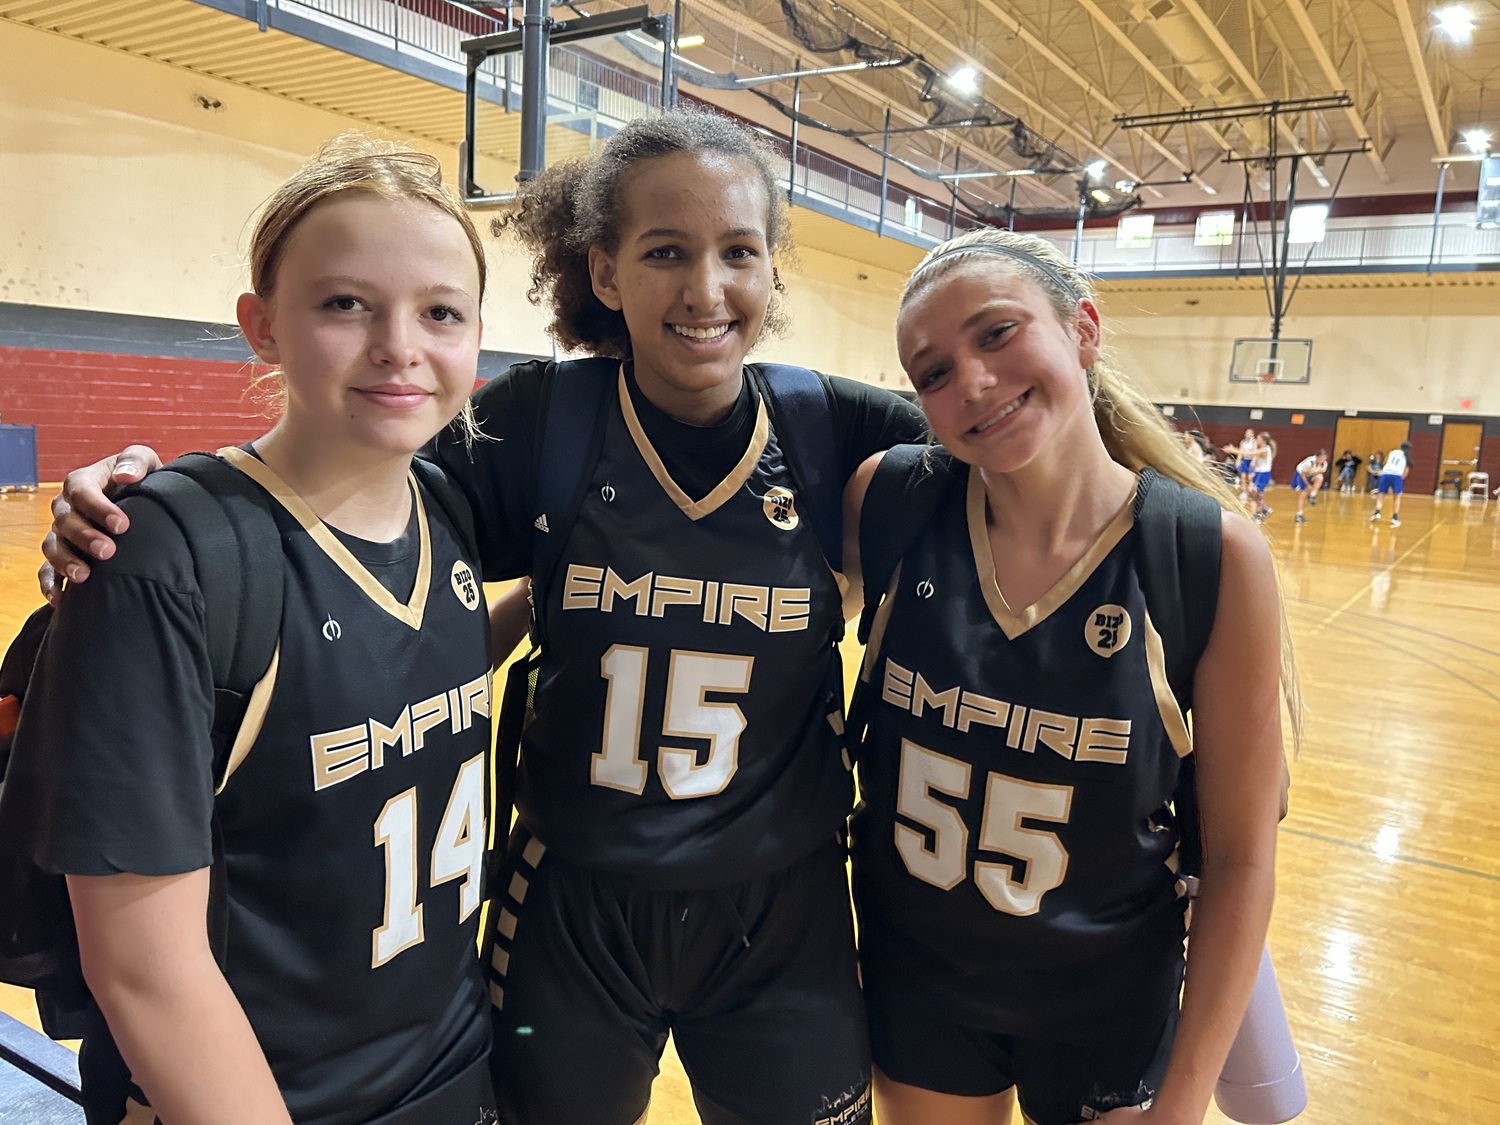 From left, Skye Smith, Lyra Aubrey and Coco Lohmiller. The Sag Harbor girls play together on the Empire AAU travel basketball team.